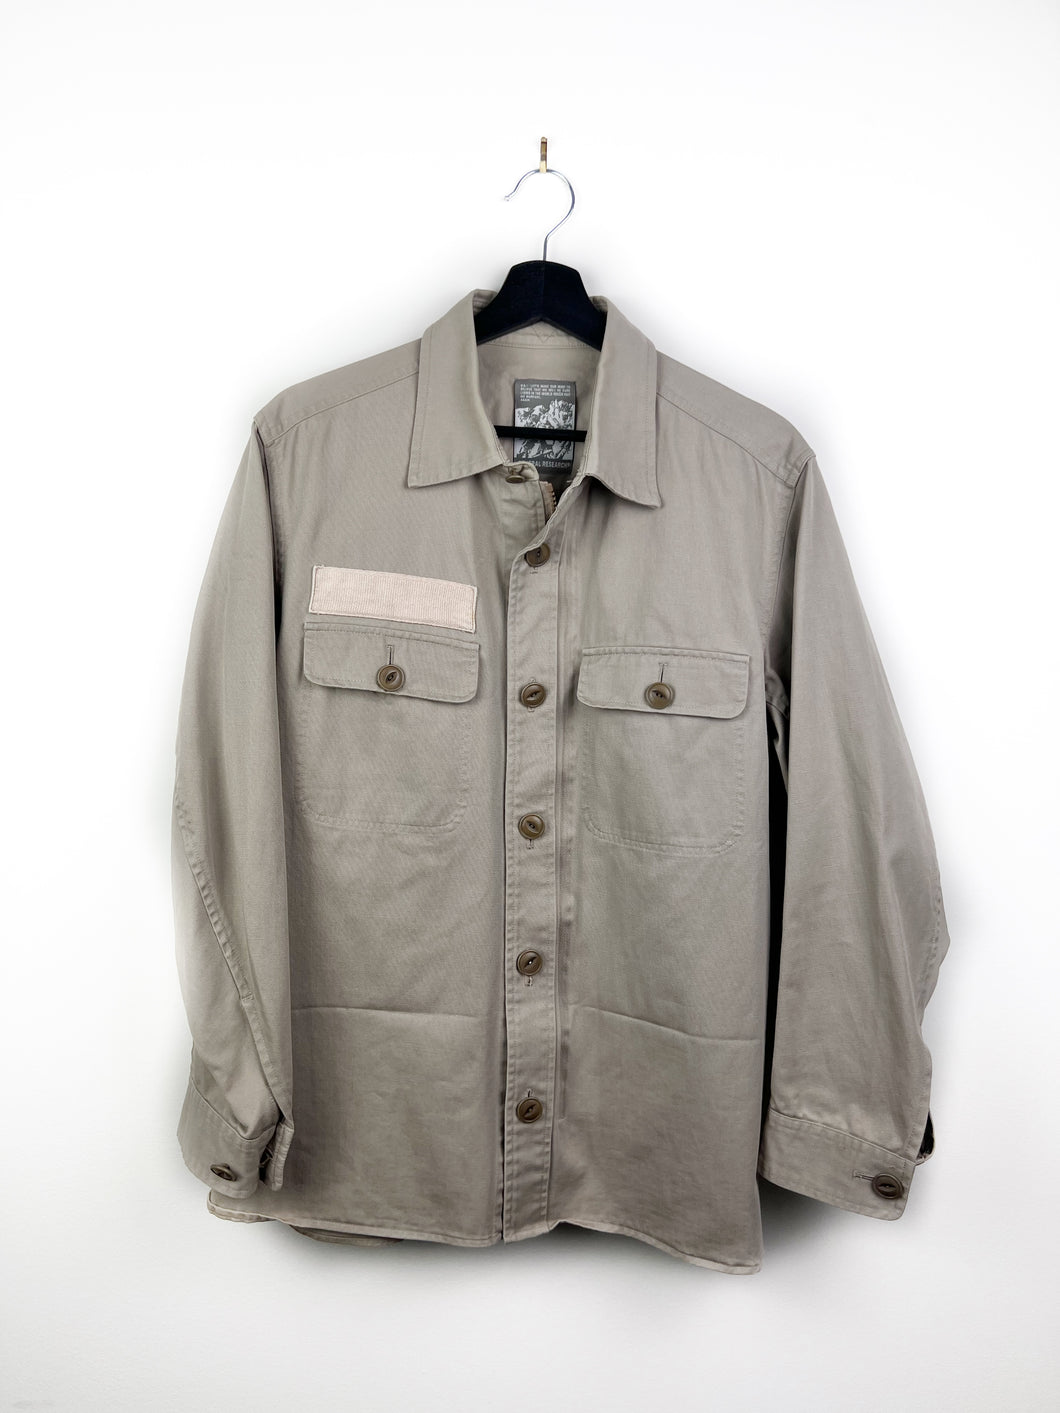 2000 General Research Style 648 Military Shirt - Medium